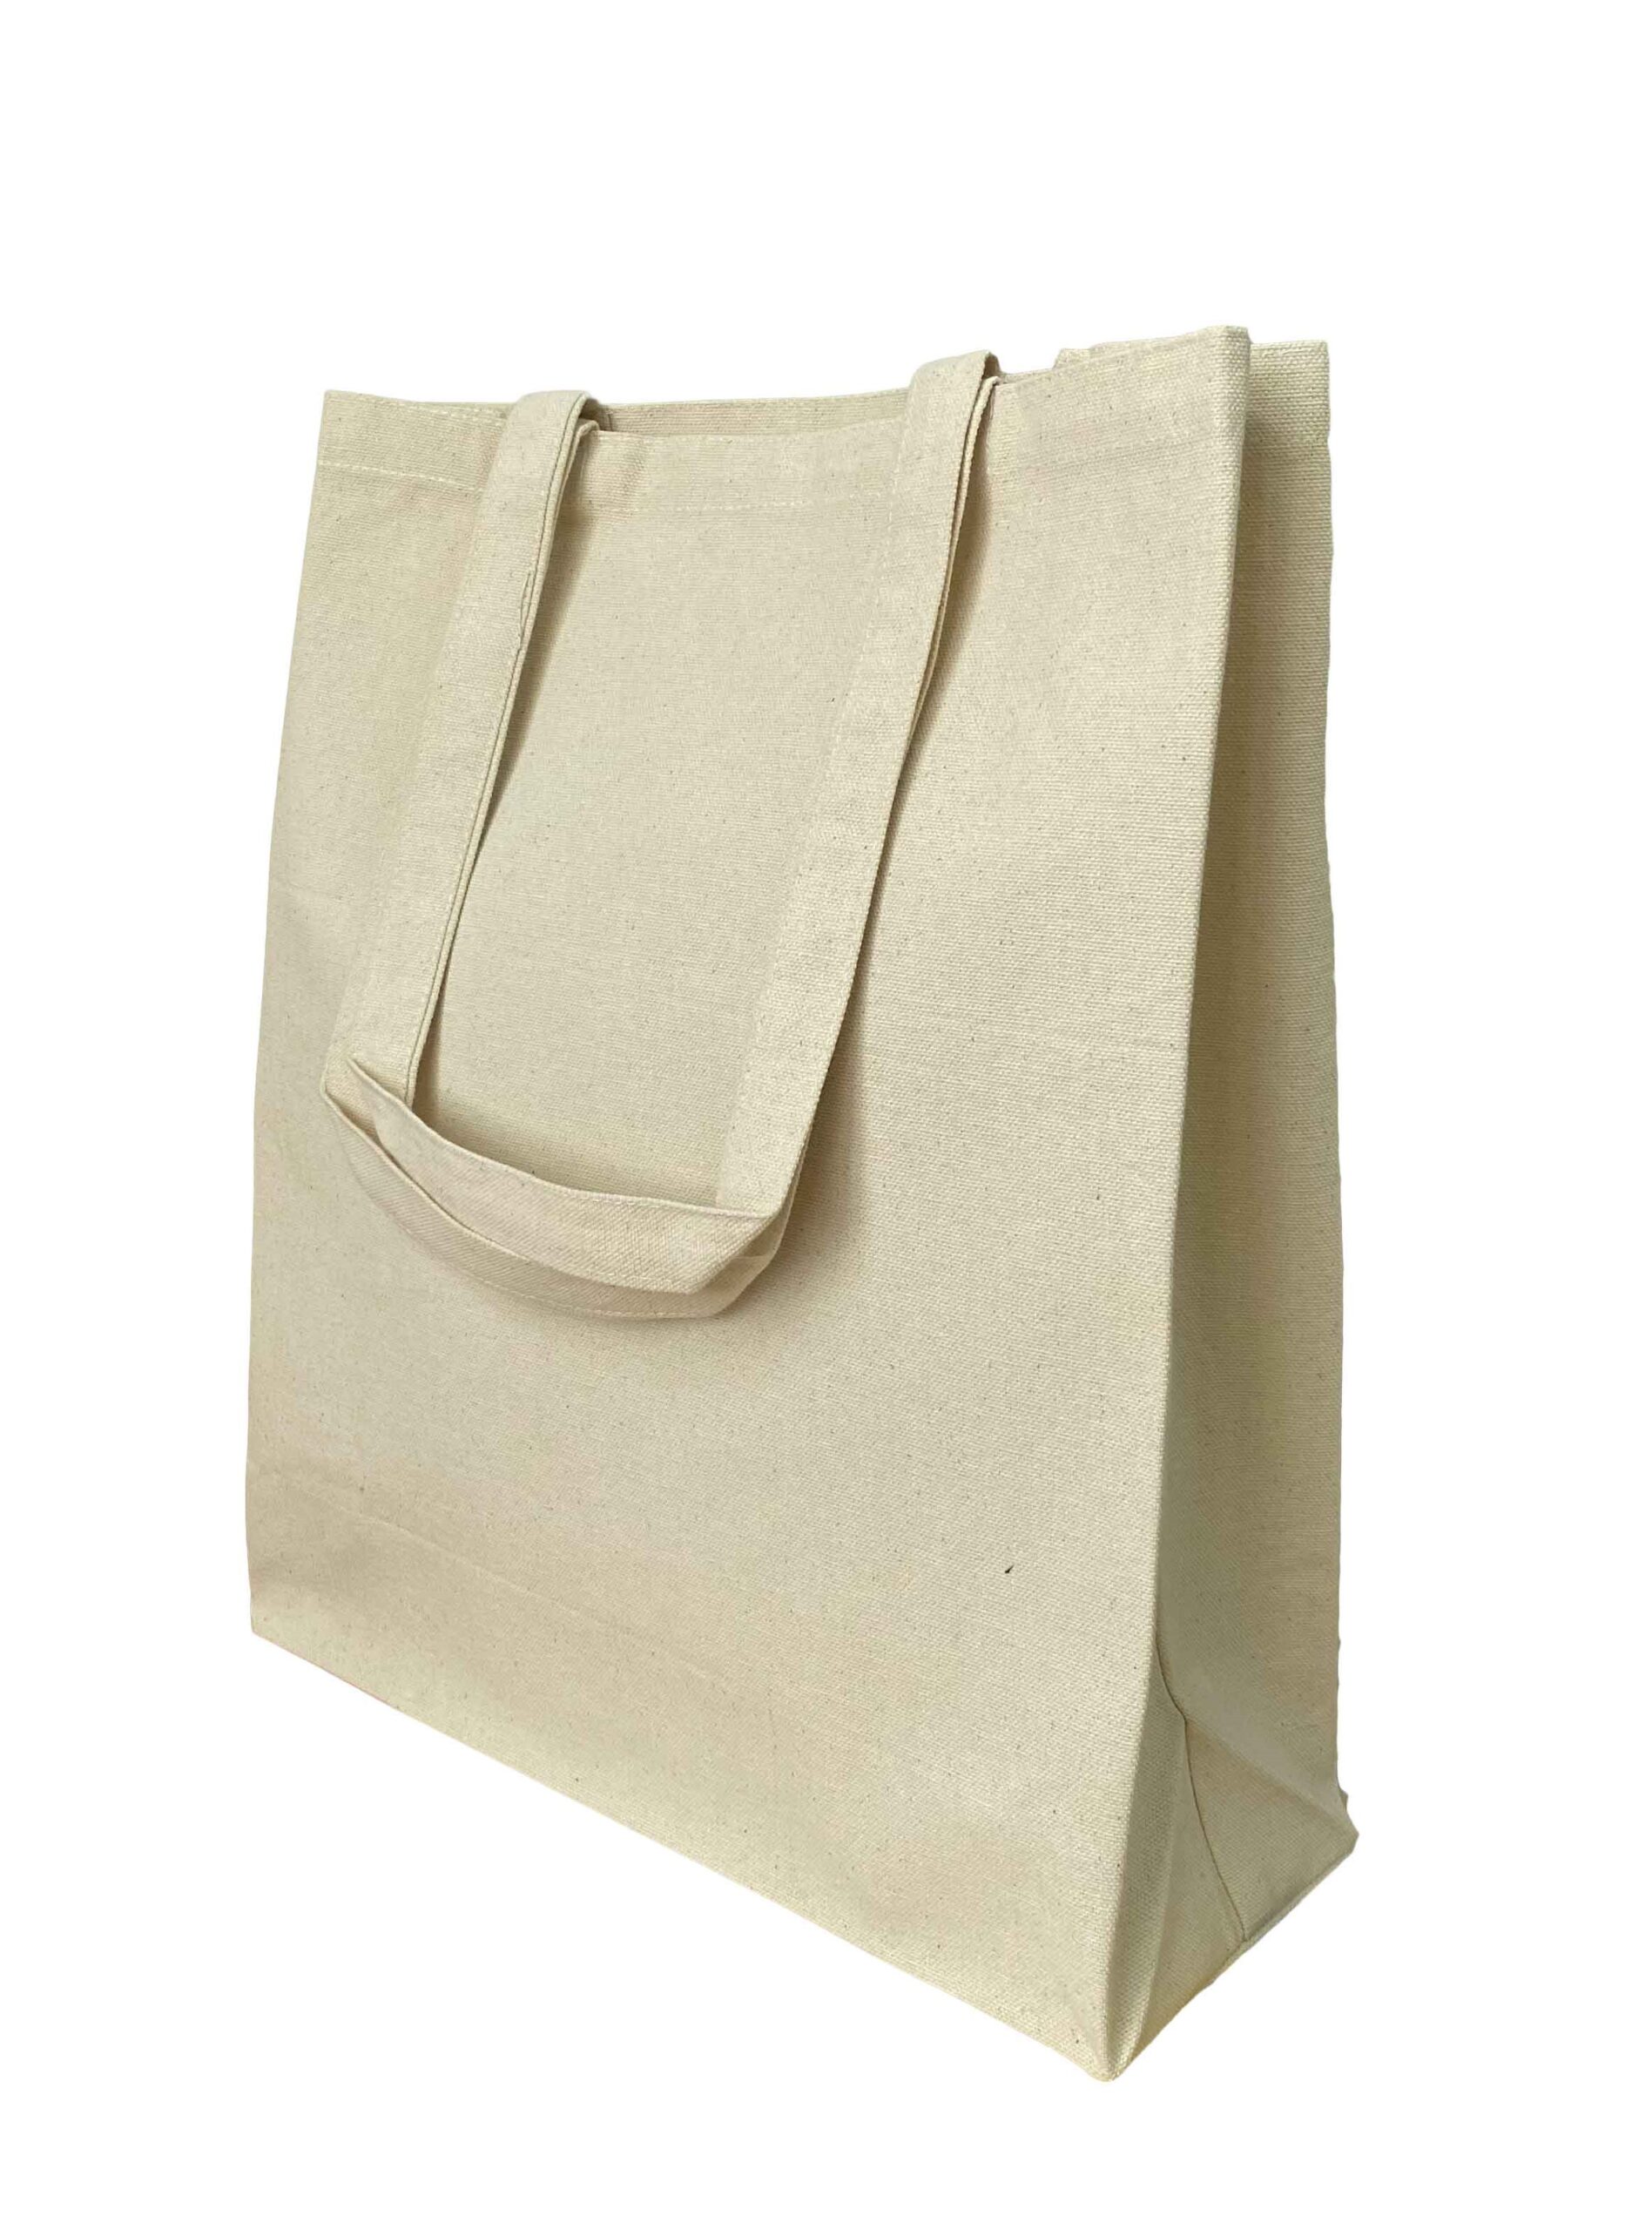 Canvas Bags manufacturers in India